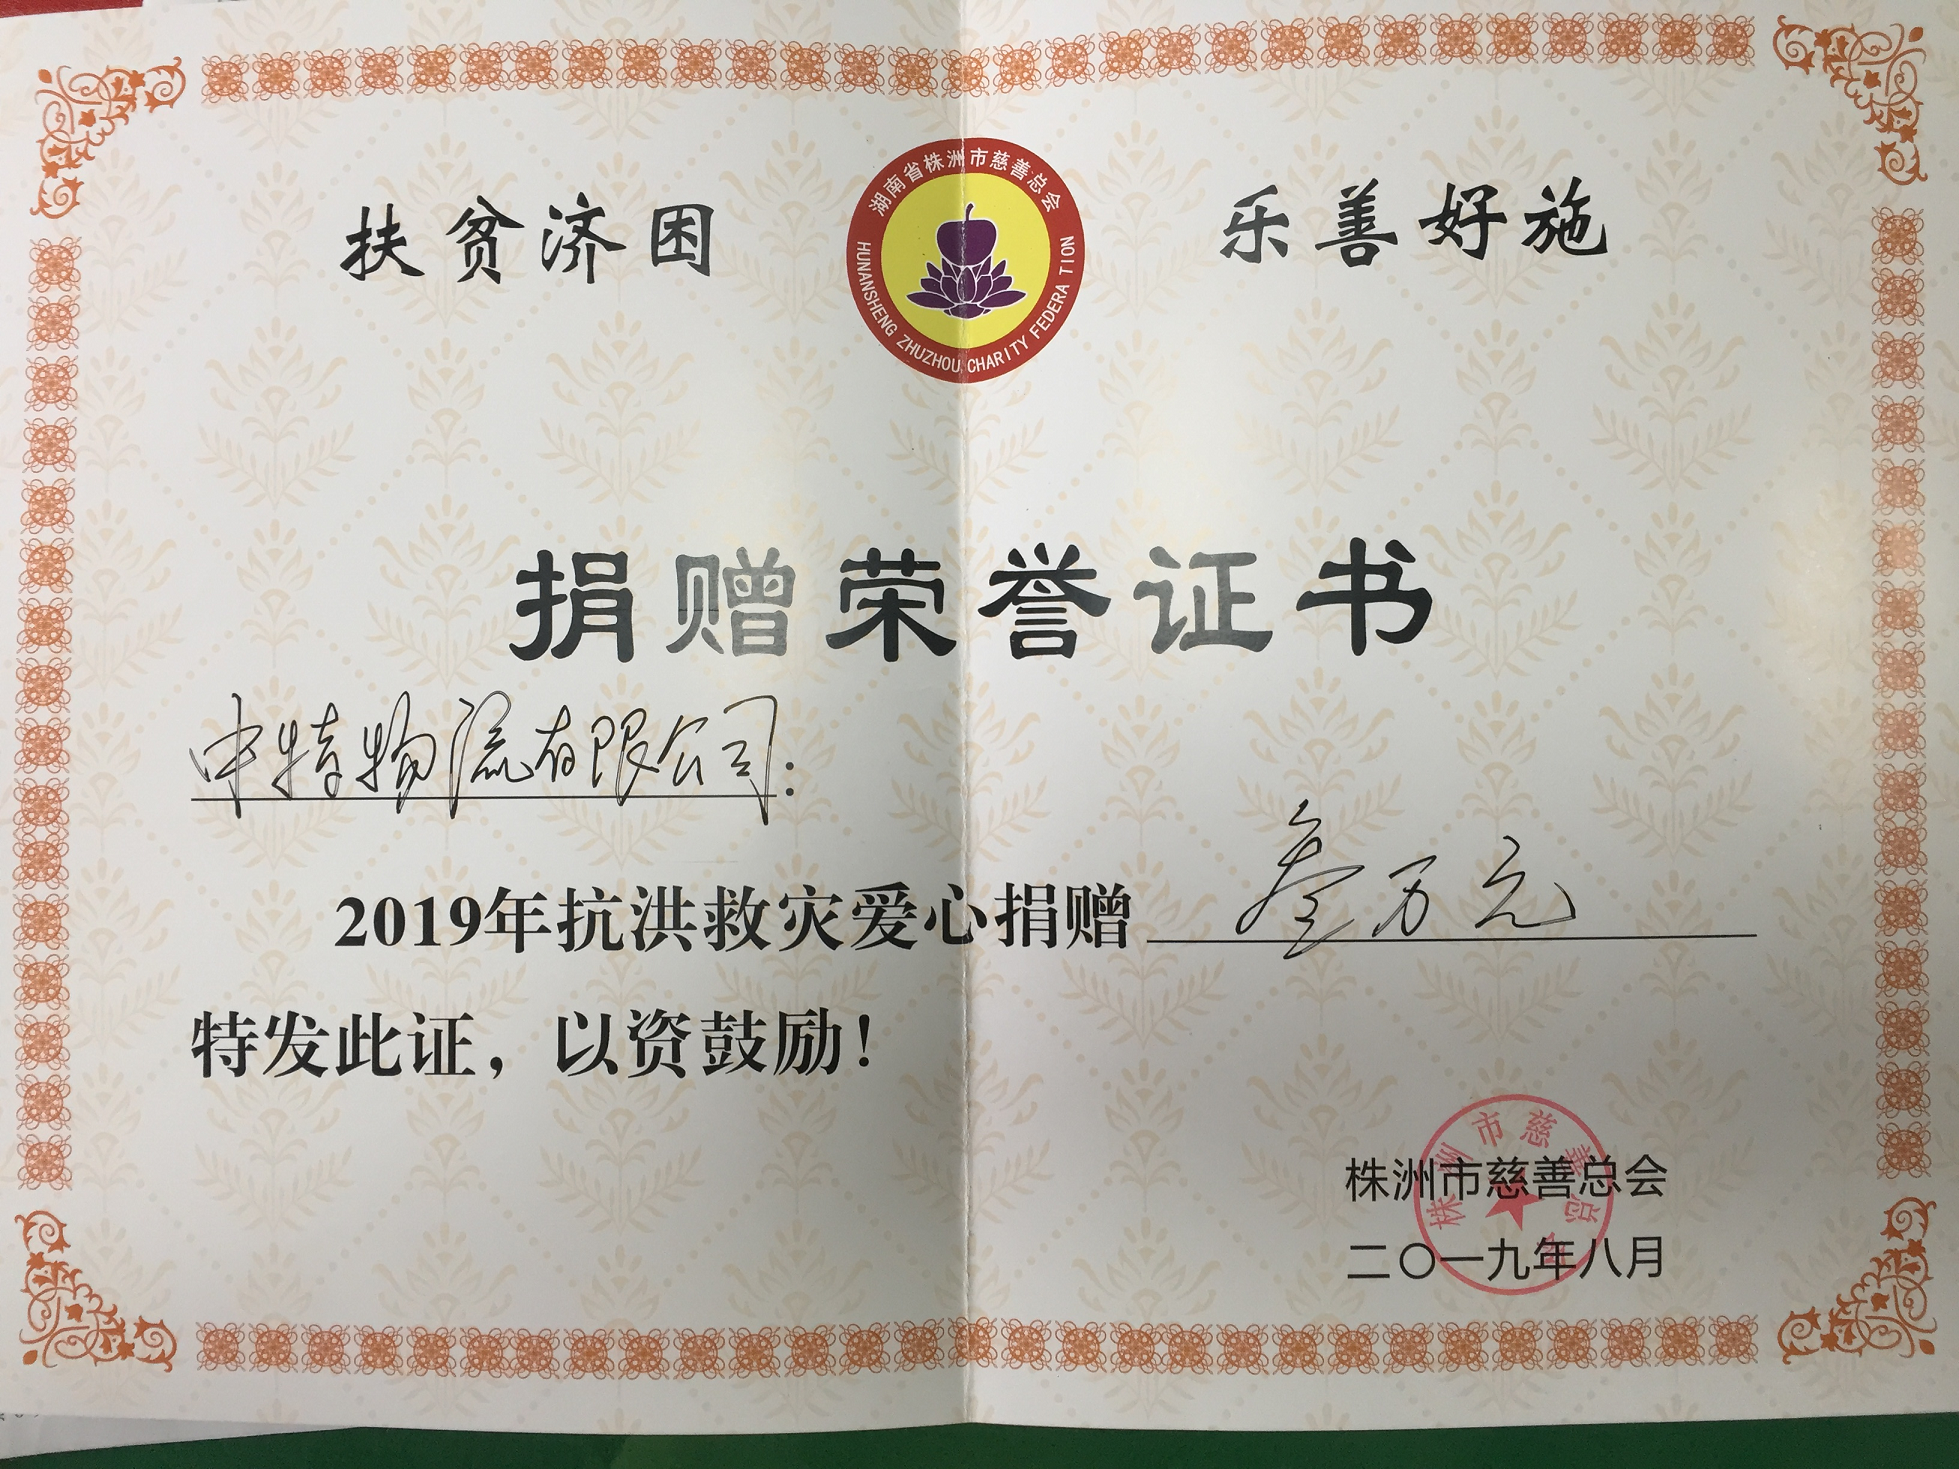 2019 Annual Active Participation Award for Coinsurance Work